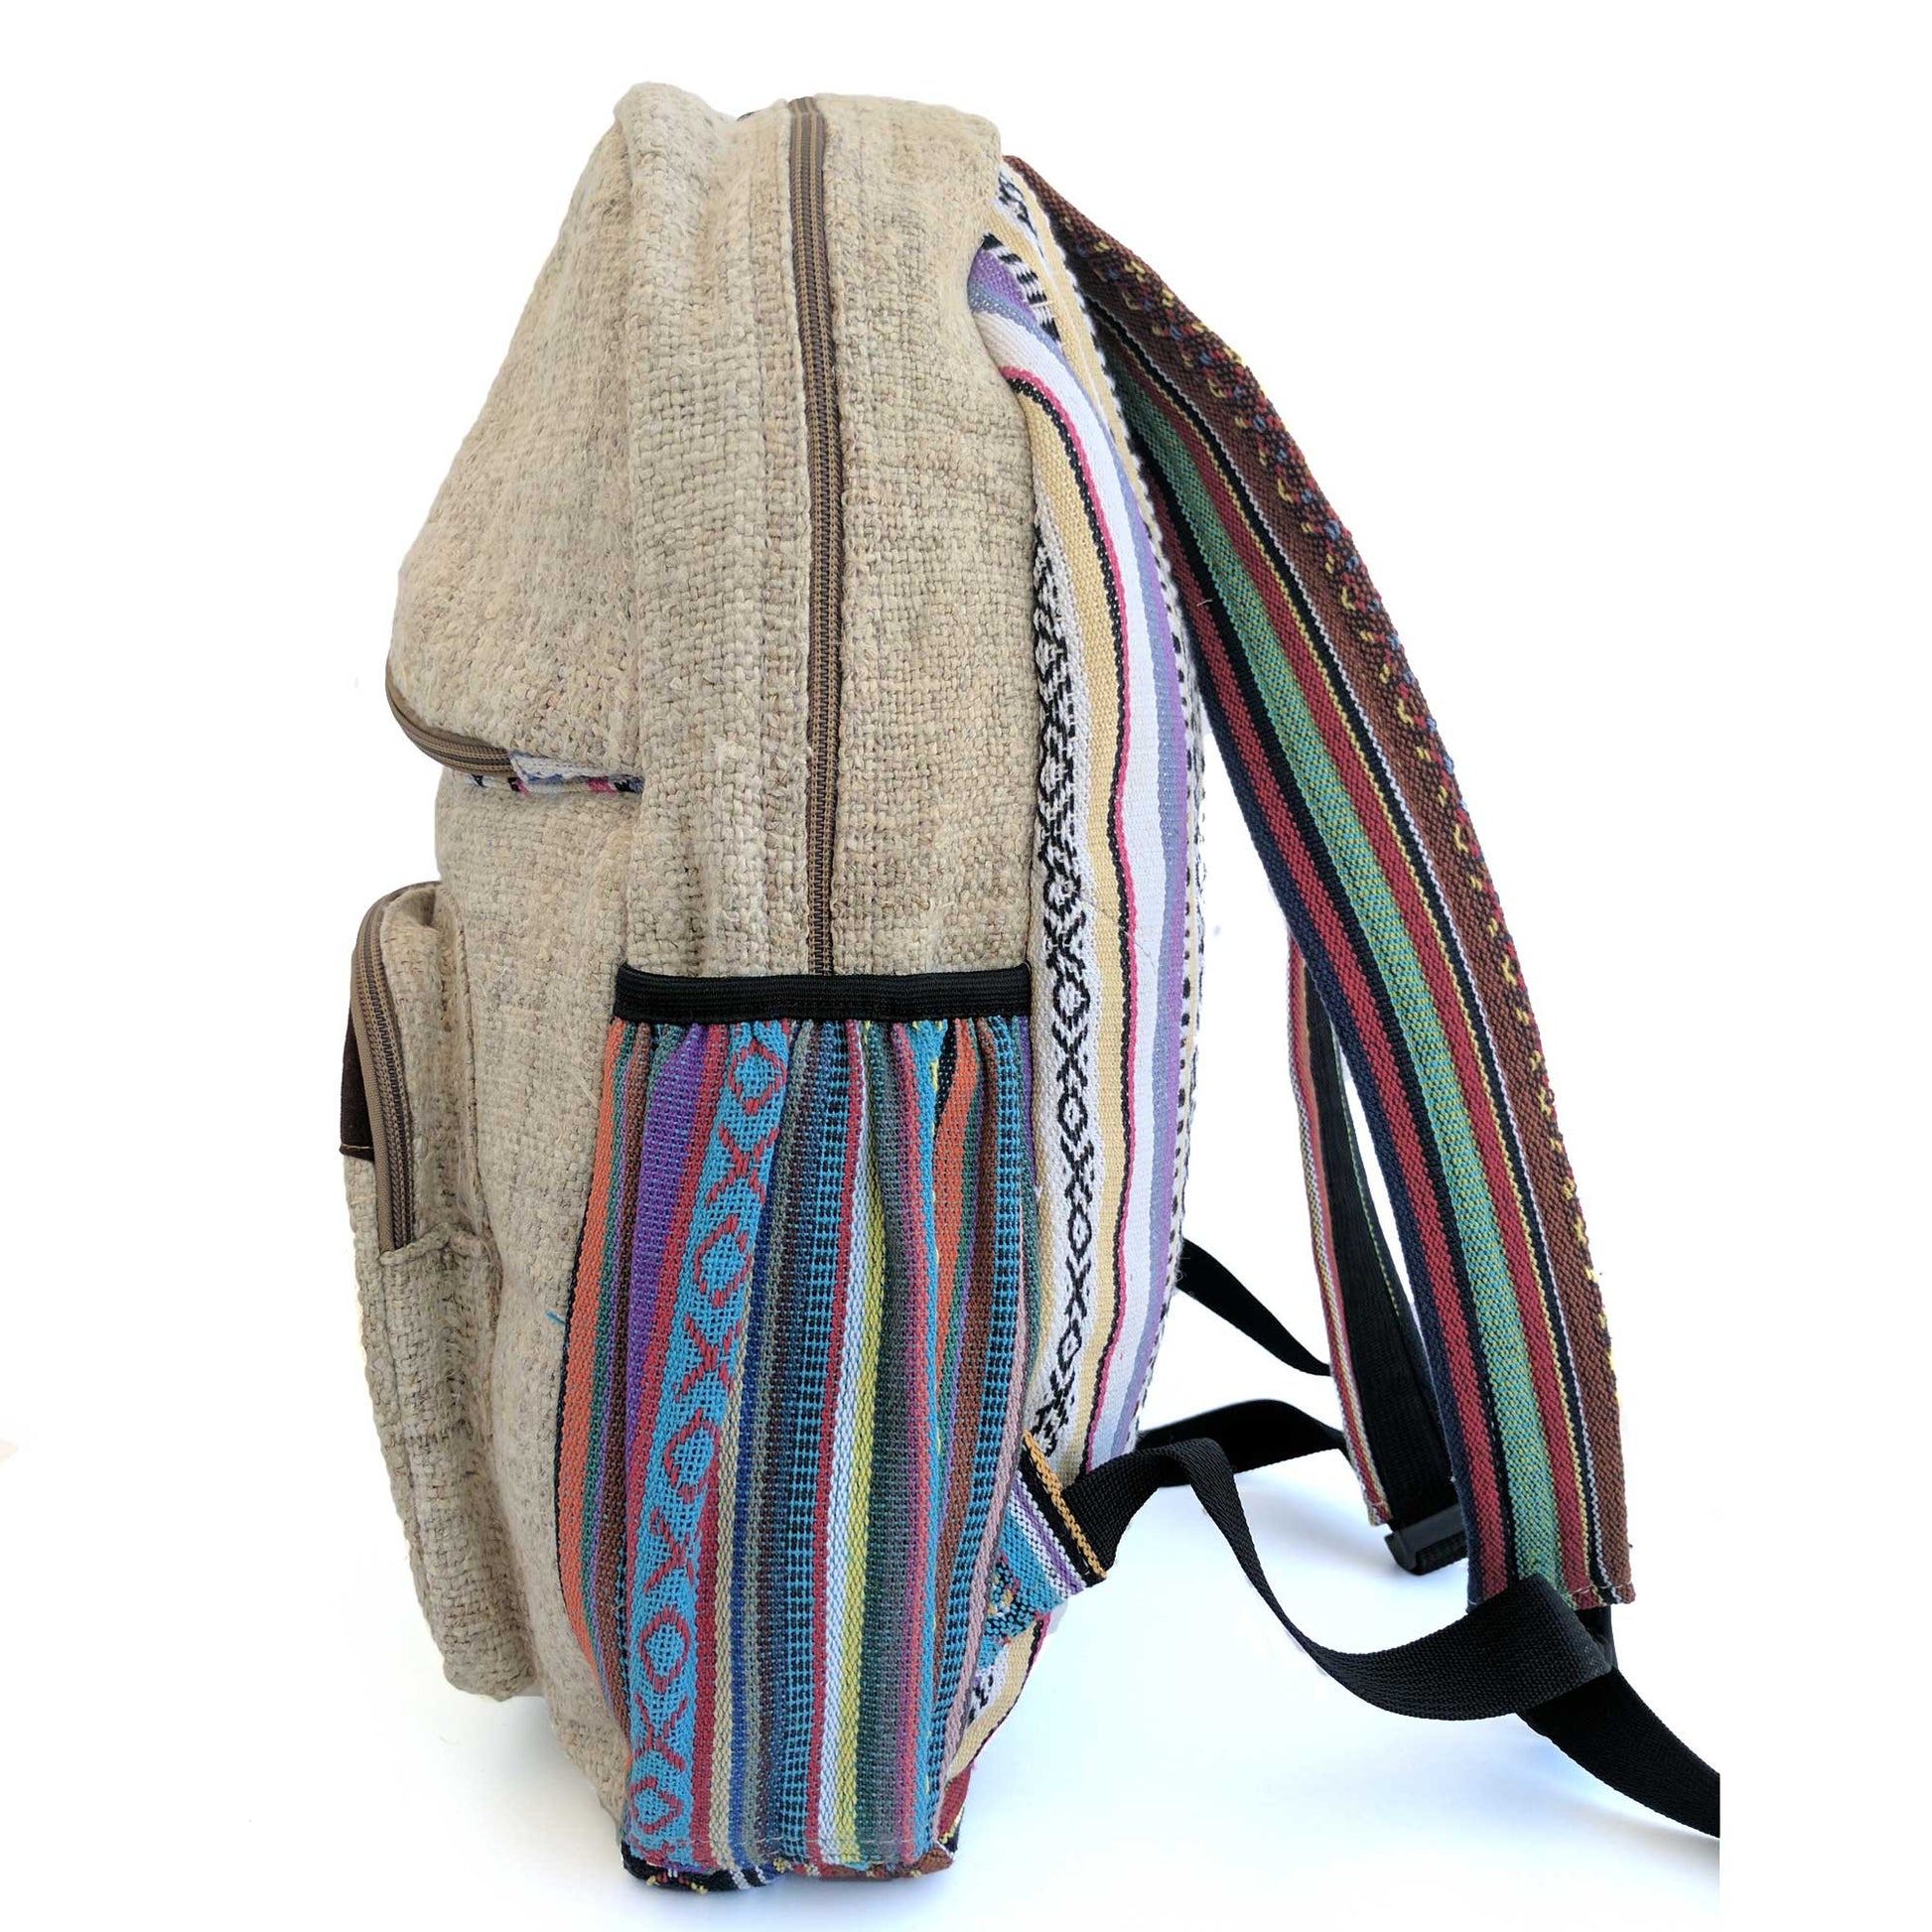 Backpack made from 100% pure hand-woven HEMP side view